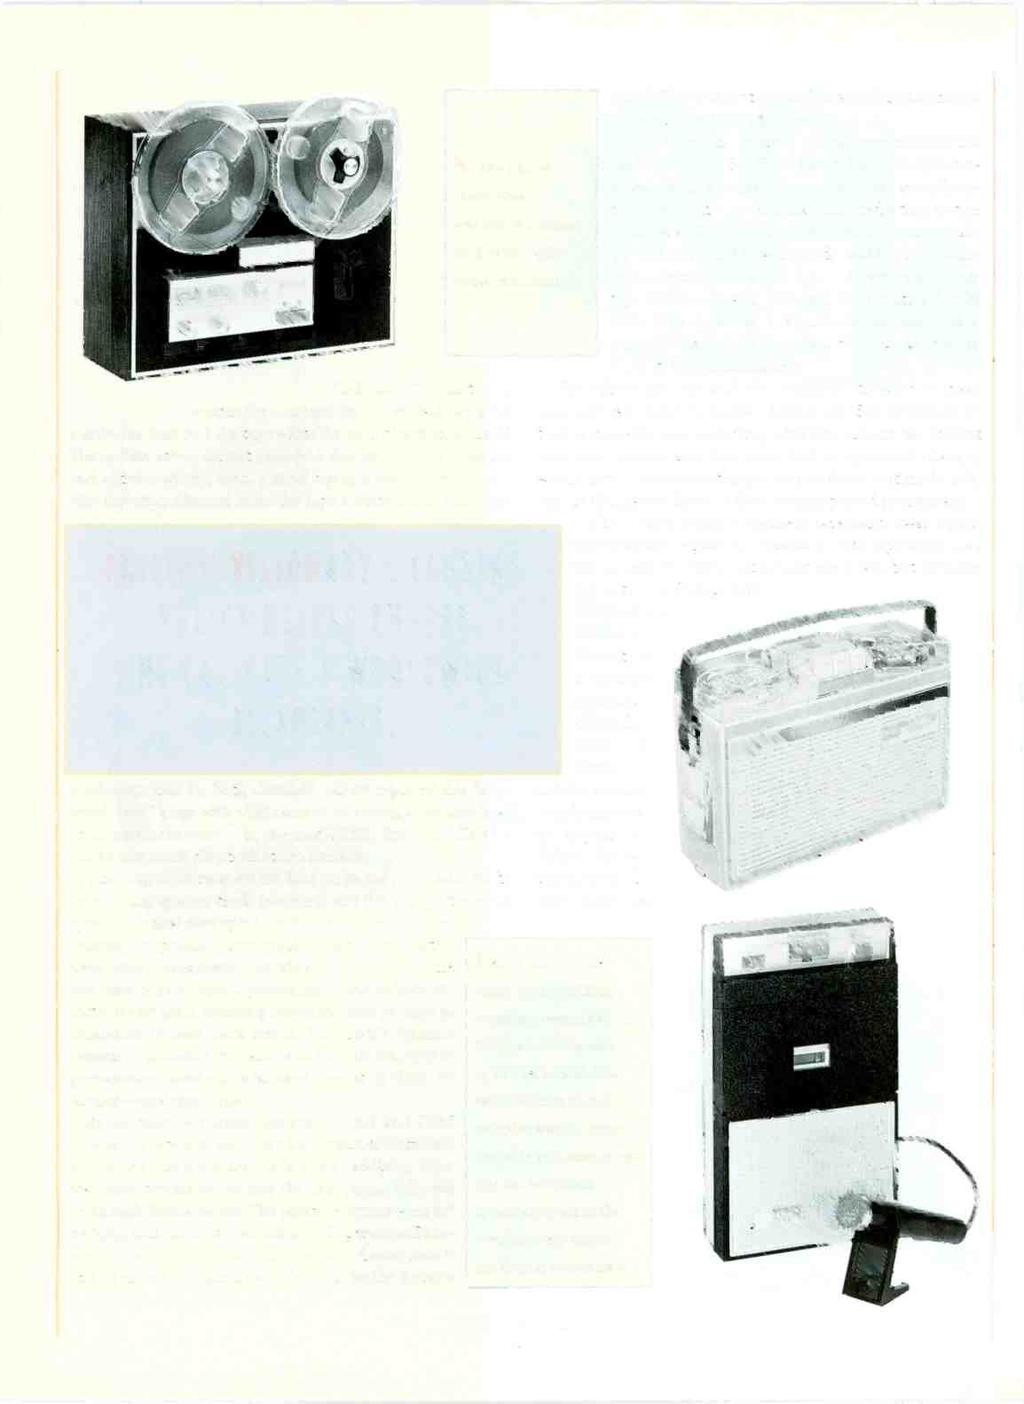 KLH's Model Forty -One was the first home deck with Dolby noise reduction. "half-track" format soon became the standard.